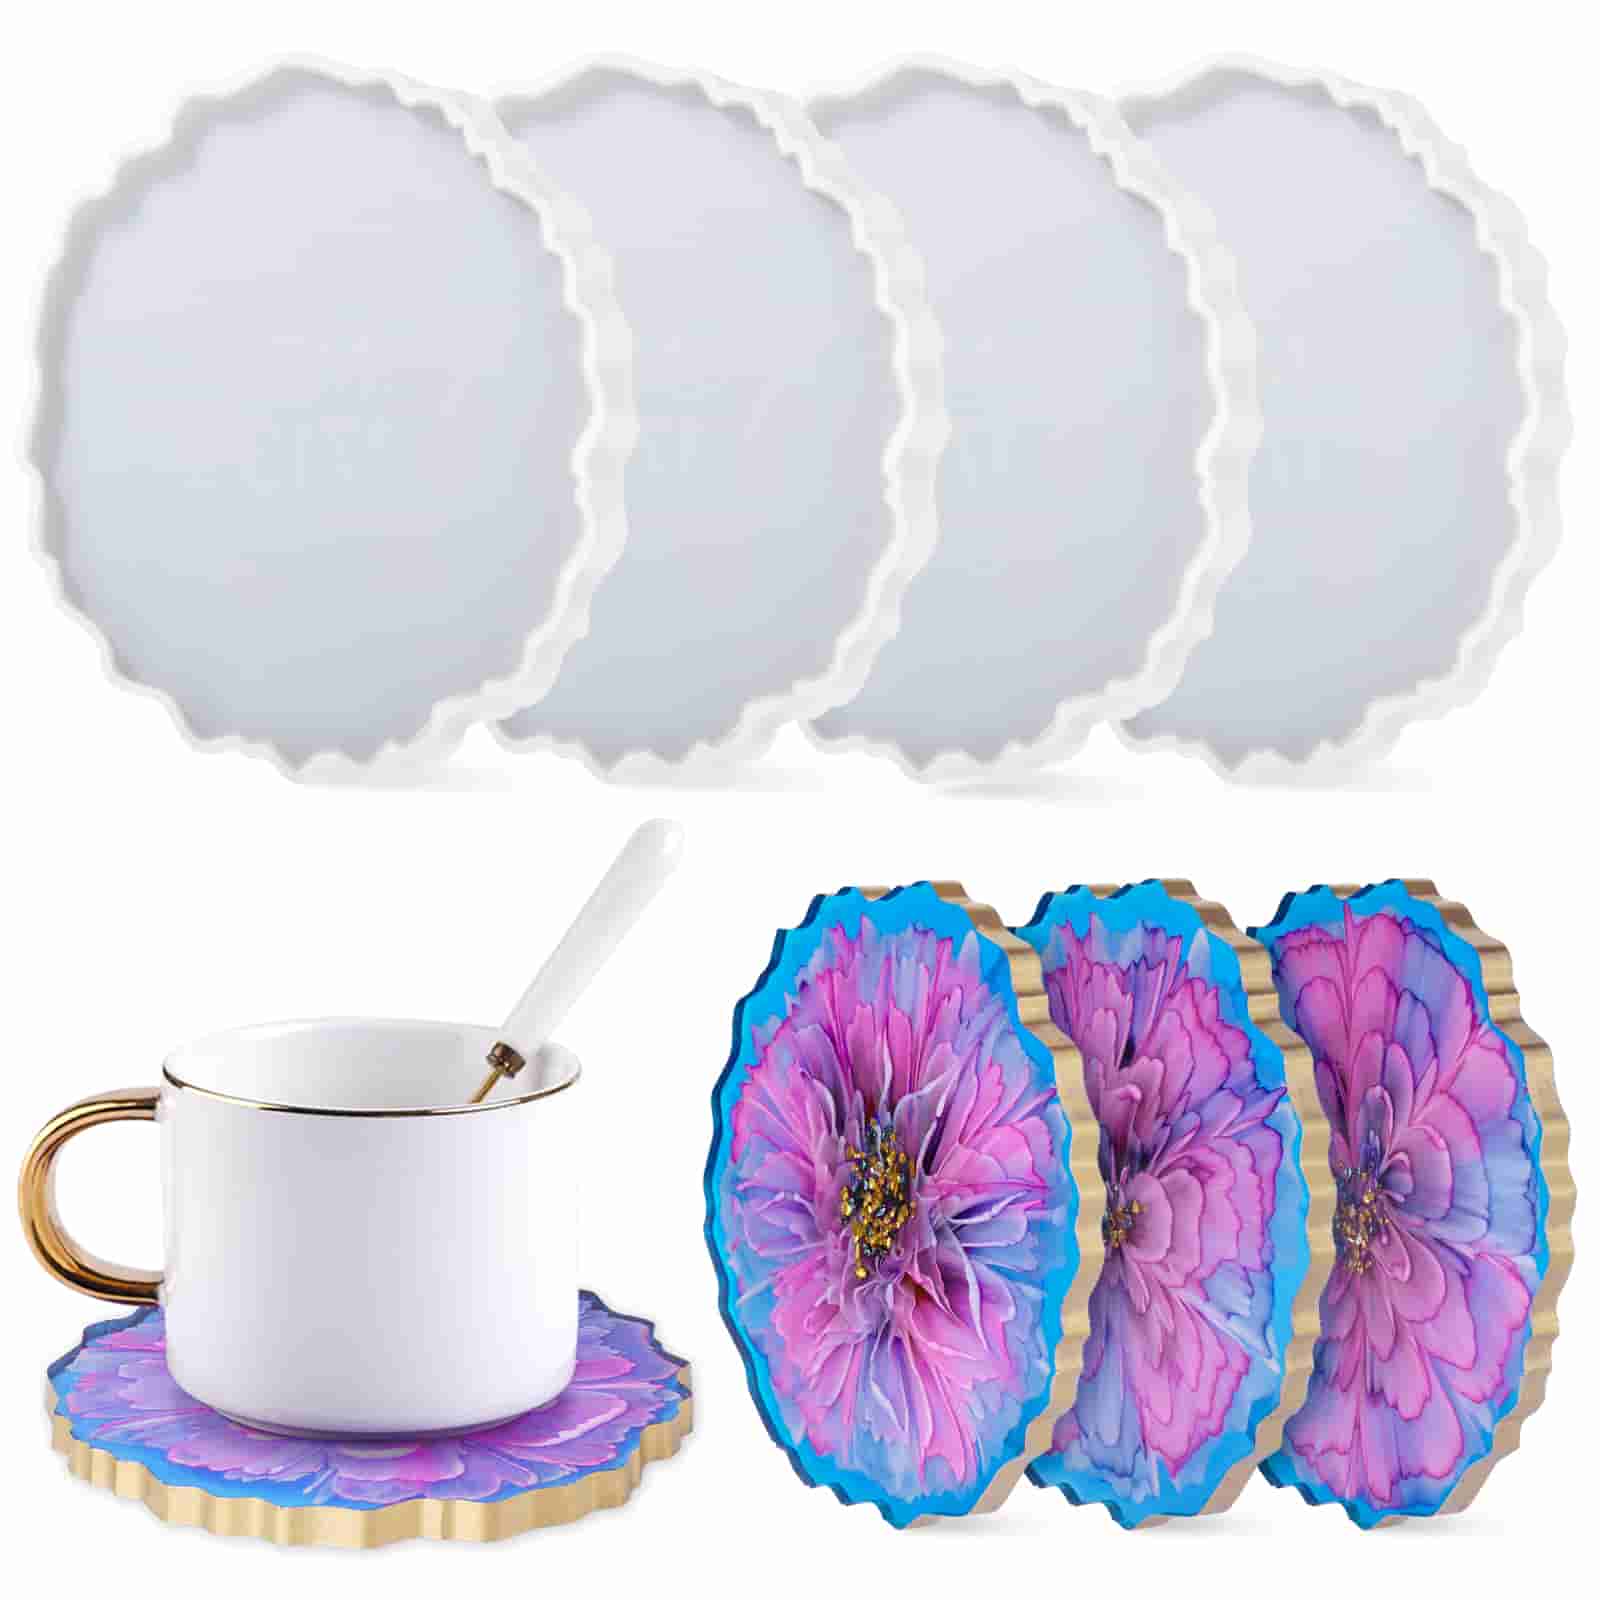 SALE Resin Molds Earring Cup Mat Silicone Molds Resin 